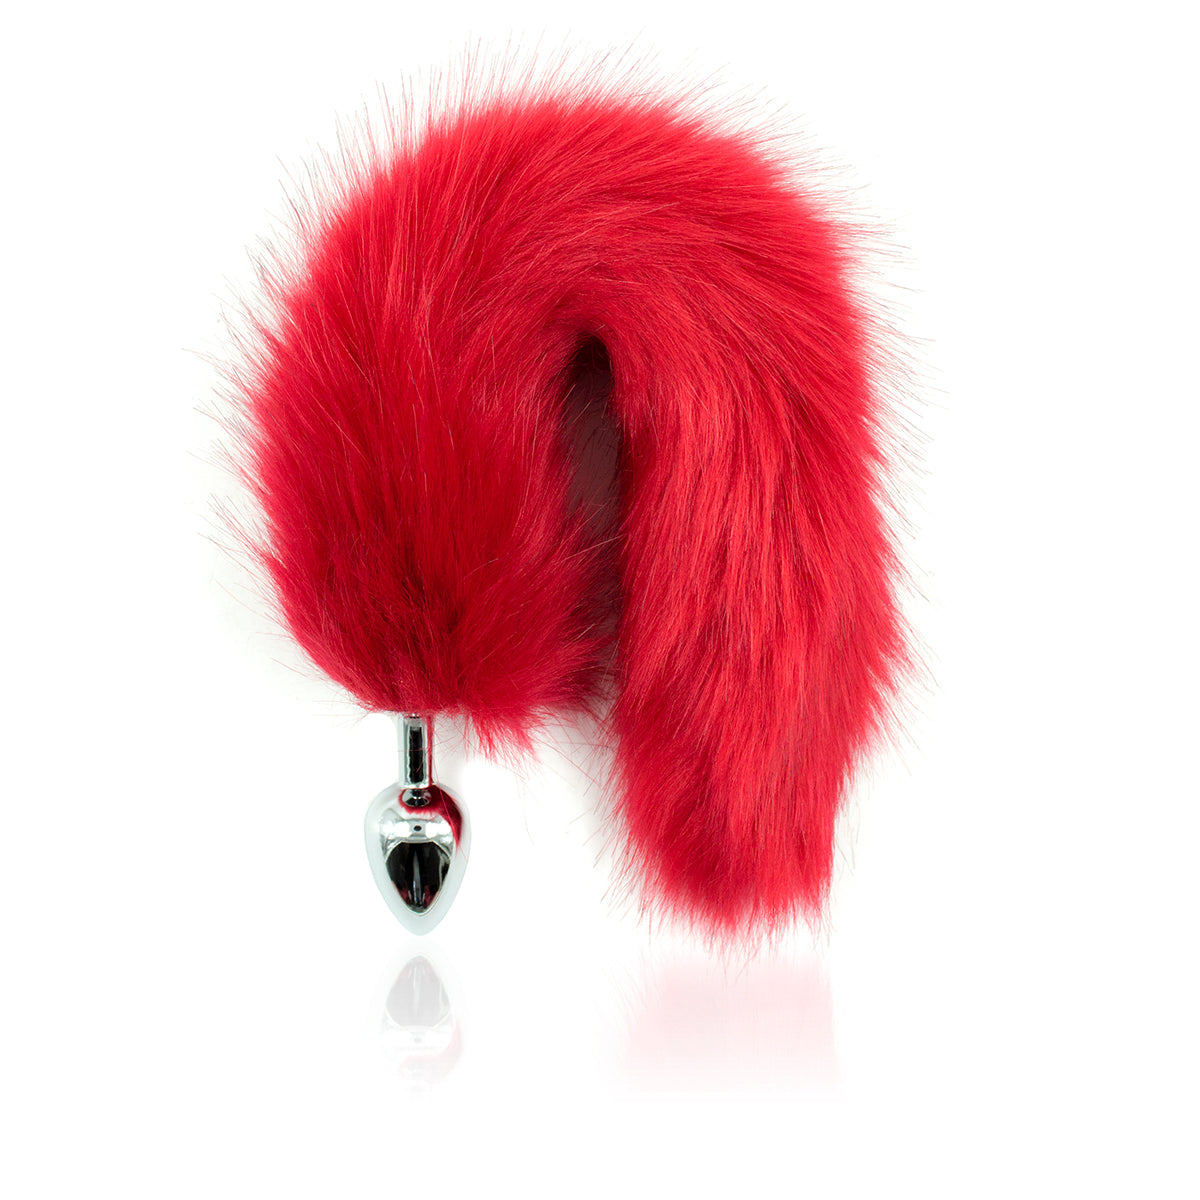 Stainless Steel Anal Butt Plug Faux Fur Fox Tail Red